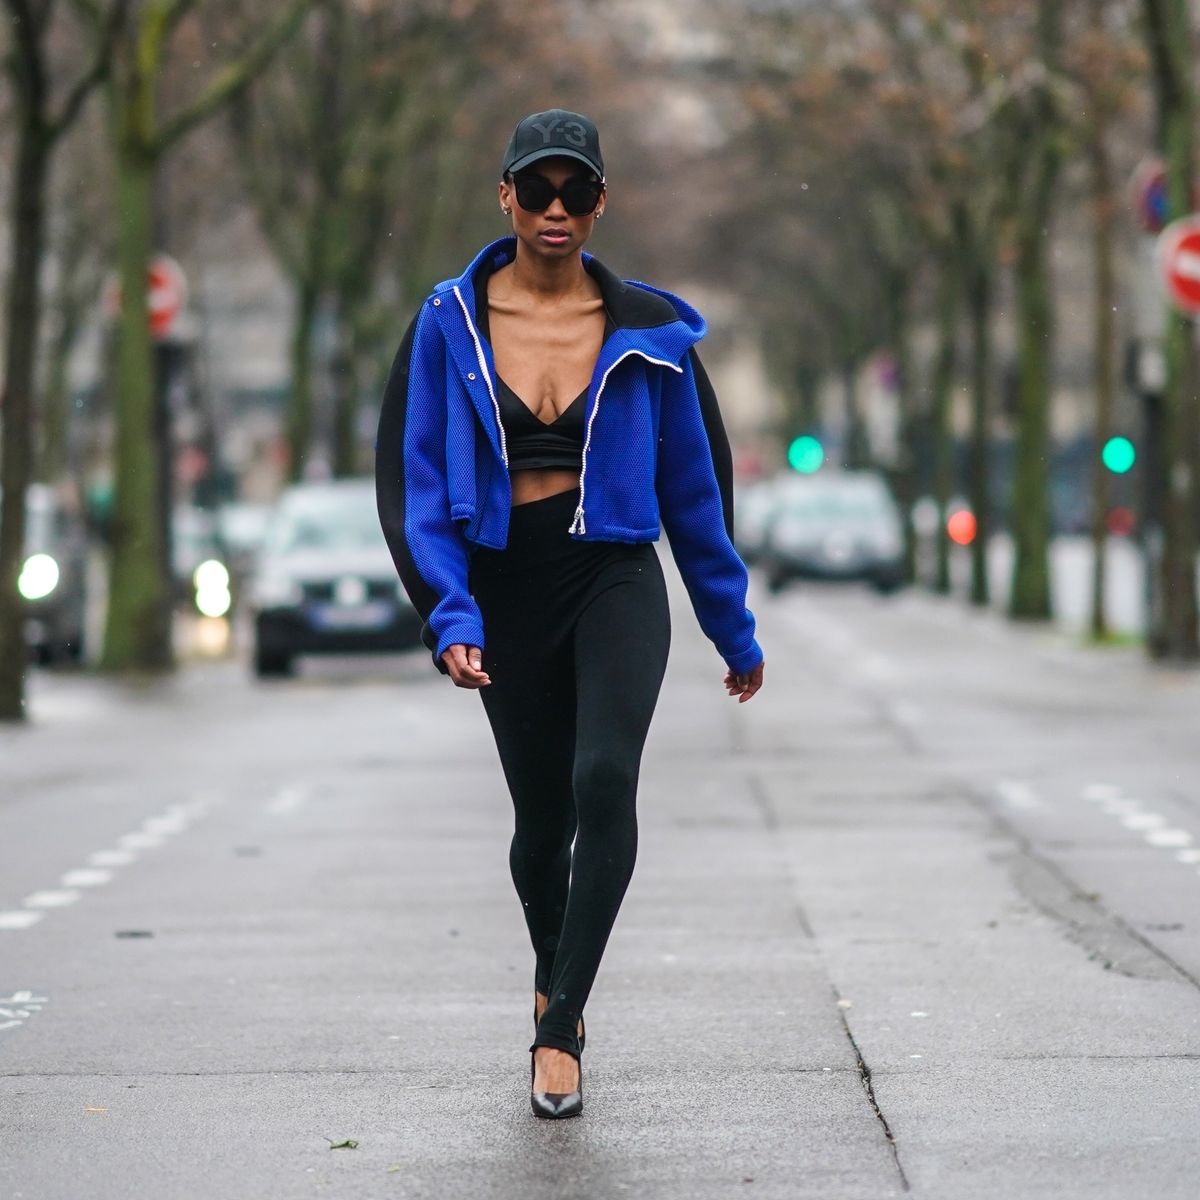 The 25 Best High-Waisted Workout Leggings to Break a Sweat In